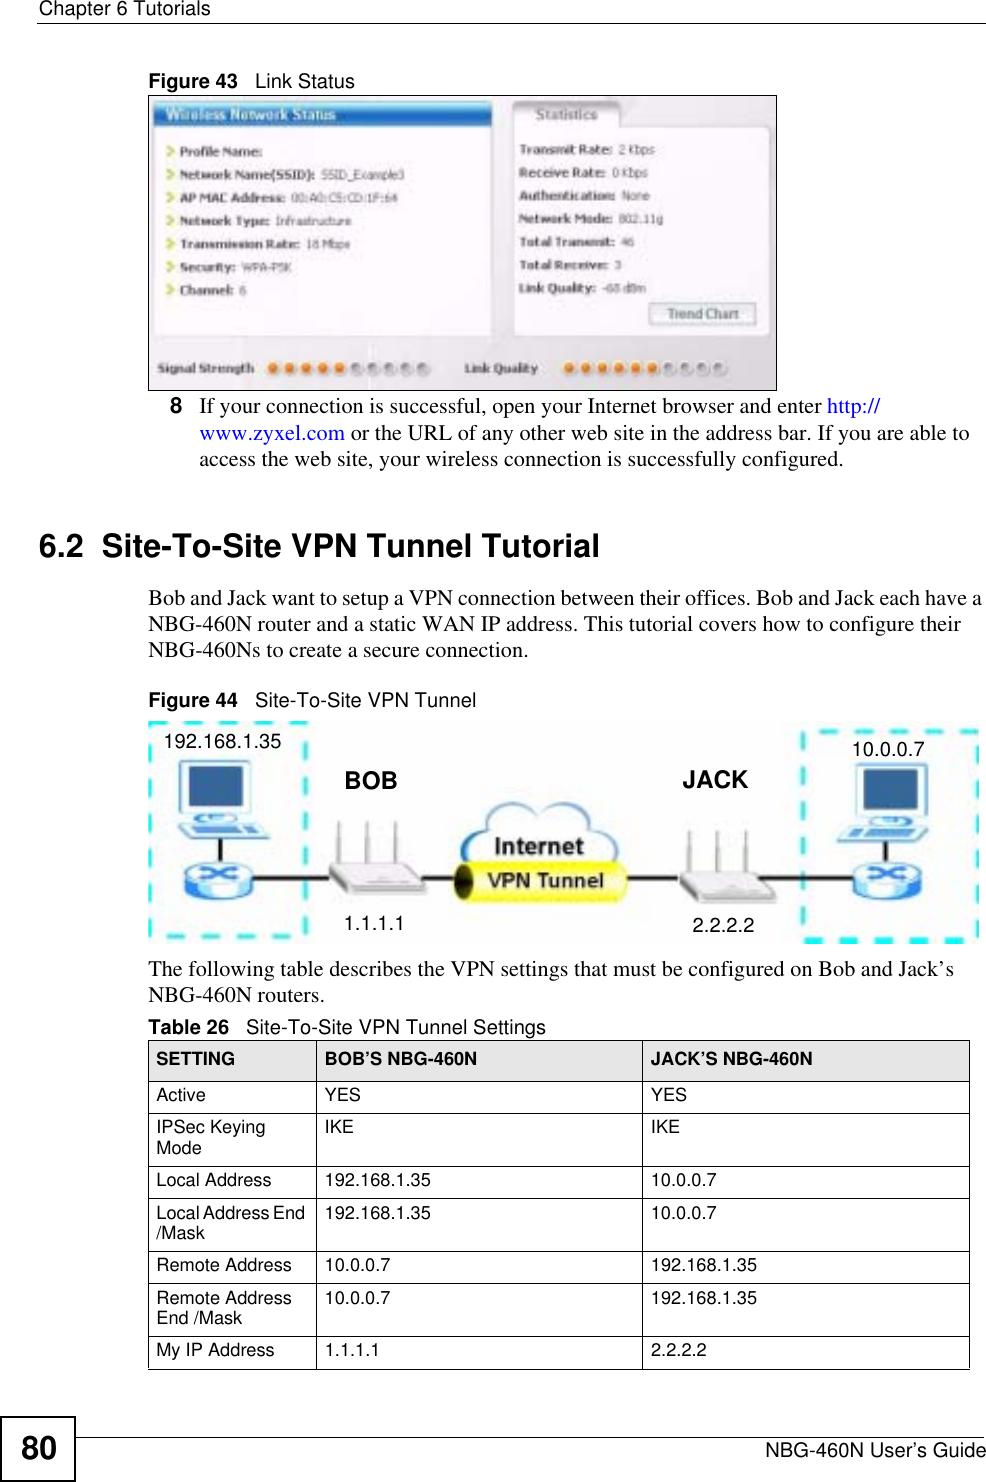 Chapter 6 TutorialsNBG-460N User’s Guide80Figure 43   Link Status 8If your connection is successful, open your Internet browser and enter http://www.zyxel.com or the URL of any other web site in the address bar. If you are able to access the web site, your wireless connection is successfully configured.6.2  Site-To-Site VPN Tunnel TutorialBob and Jack want to setup a VPN connection between their offices. Bob and Jack each have a NBG-460N router and a static WAN IP address. This tutorial covers how to configure their NBG-460Ns to create a secure connection.Figure 44   Site-To-Site VPN TunnelThe following table describes the VPN settings that must be configured on Bob and Jack’s NBG-460N routers.Table 26   Site-To-Site VPN Tunnel Settings SETTING BOB’S NBG-460N JACK’S NBG-460NActive YES YESIPSec Keying Mode IKE IKELocal Address 192.168.1.35 10.0.0.7Local Address End /Mask 192.168.1.35 10.0.0.7Remote Address 10.0.0.7 192.168.1.35Remote Address End /Mask 10.0.0.7 192.168.1.35My IP Address  1.1.1.1 2.2.2.2192.168.1.35 10.0.0.7BOB JACK1.1.1.1 2.2.2.2